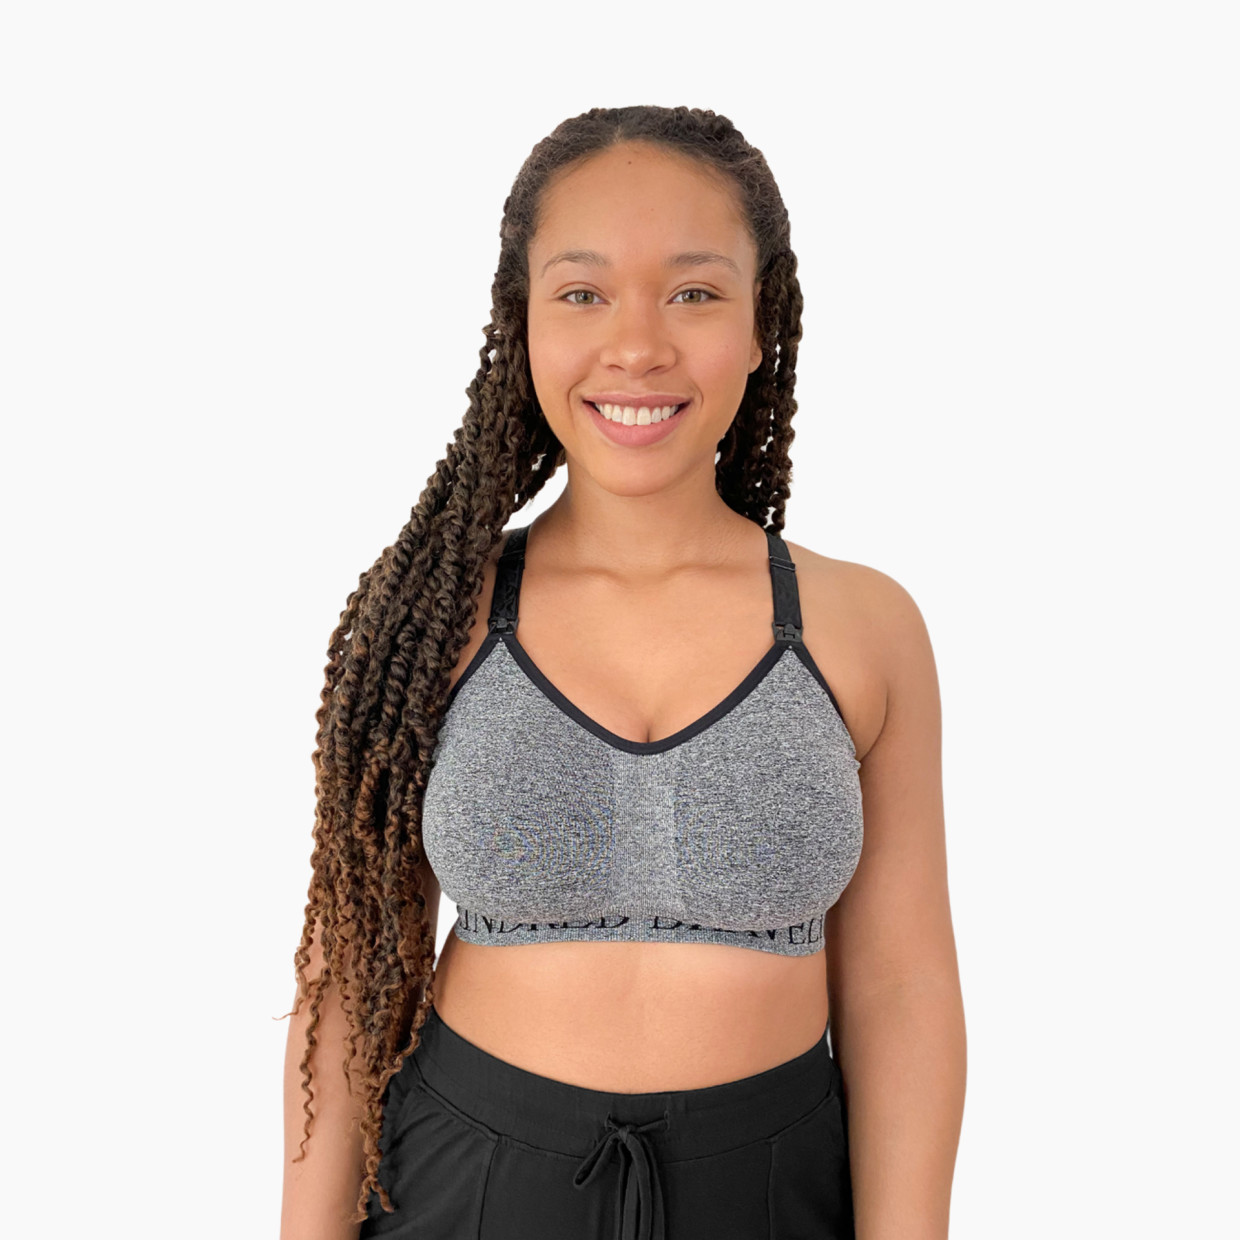 Kindred Bravely Sublime Support Low Impact Nursing & Maternity Sports Bra - Grey Heather, Xx-Large.